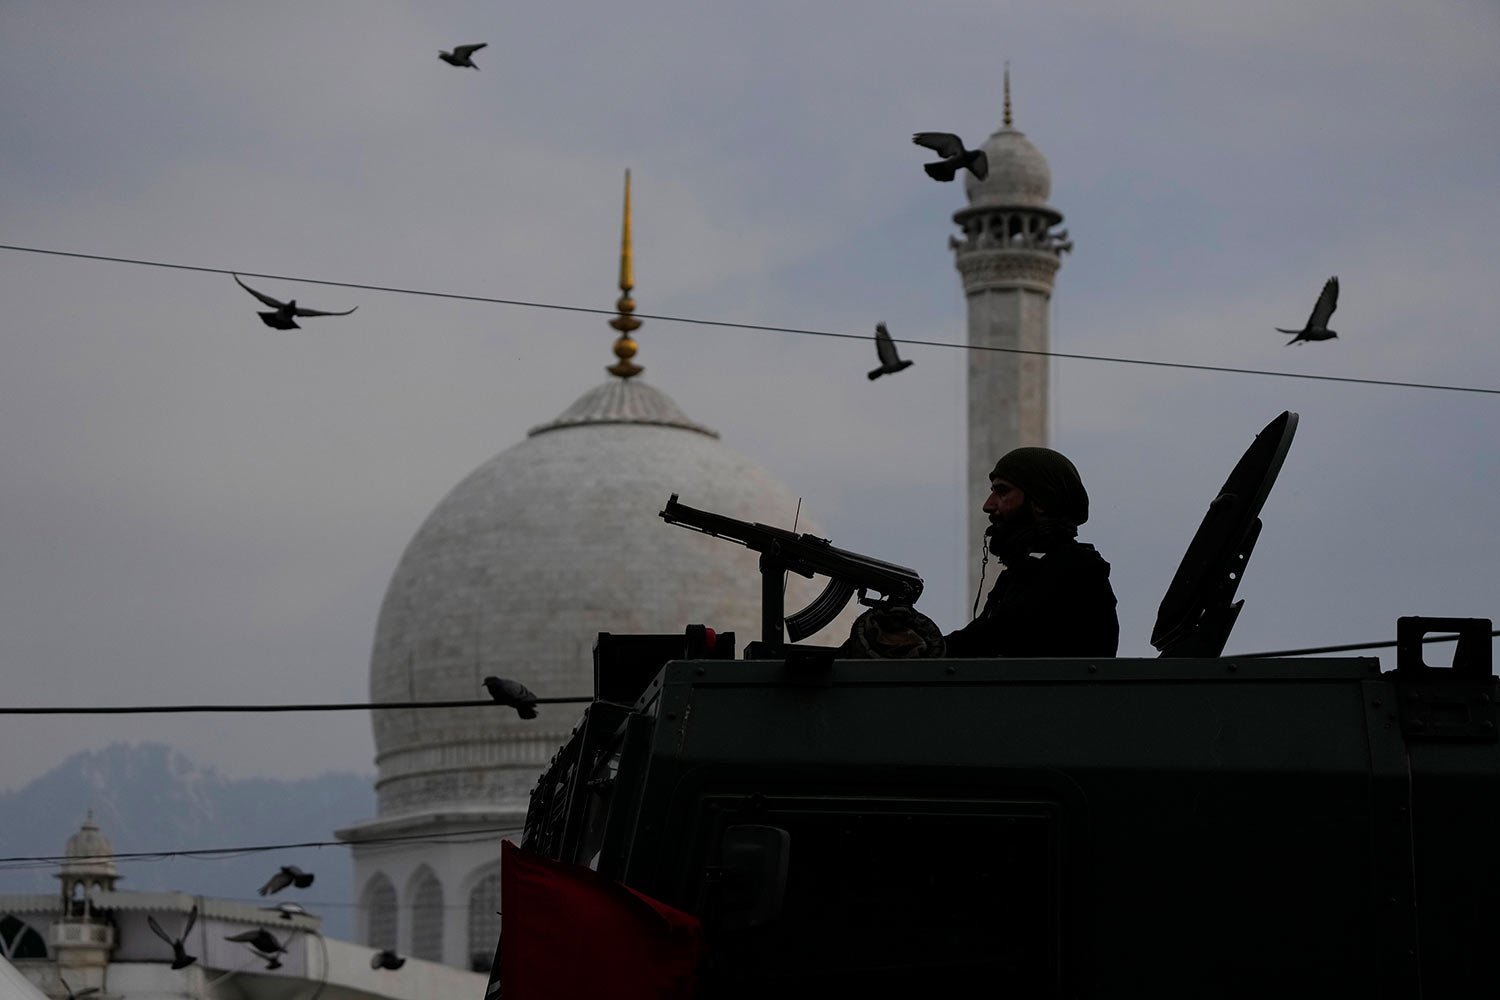  Jammu and Kashmir Special Operation Group (SOG) solider stands guard atop of an armored vehicle outside the Hazratbal shrine on the outskirts of Srinagar, Indian controlled Kashmir,Thursday, March 10, 2022. (AP Photo/Mukhtar Khan) 